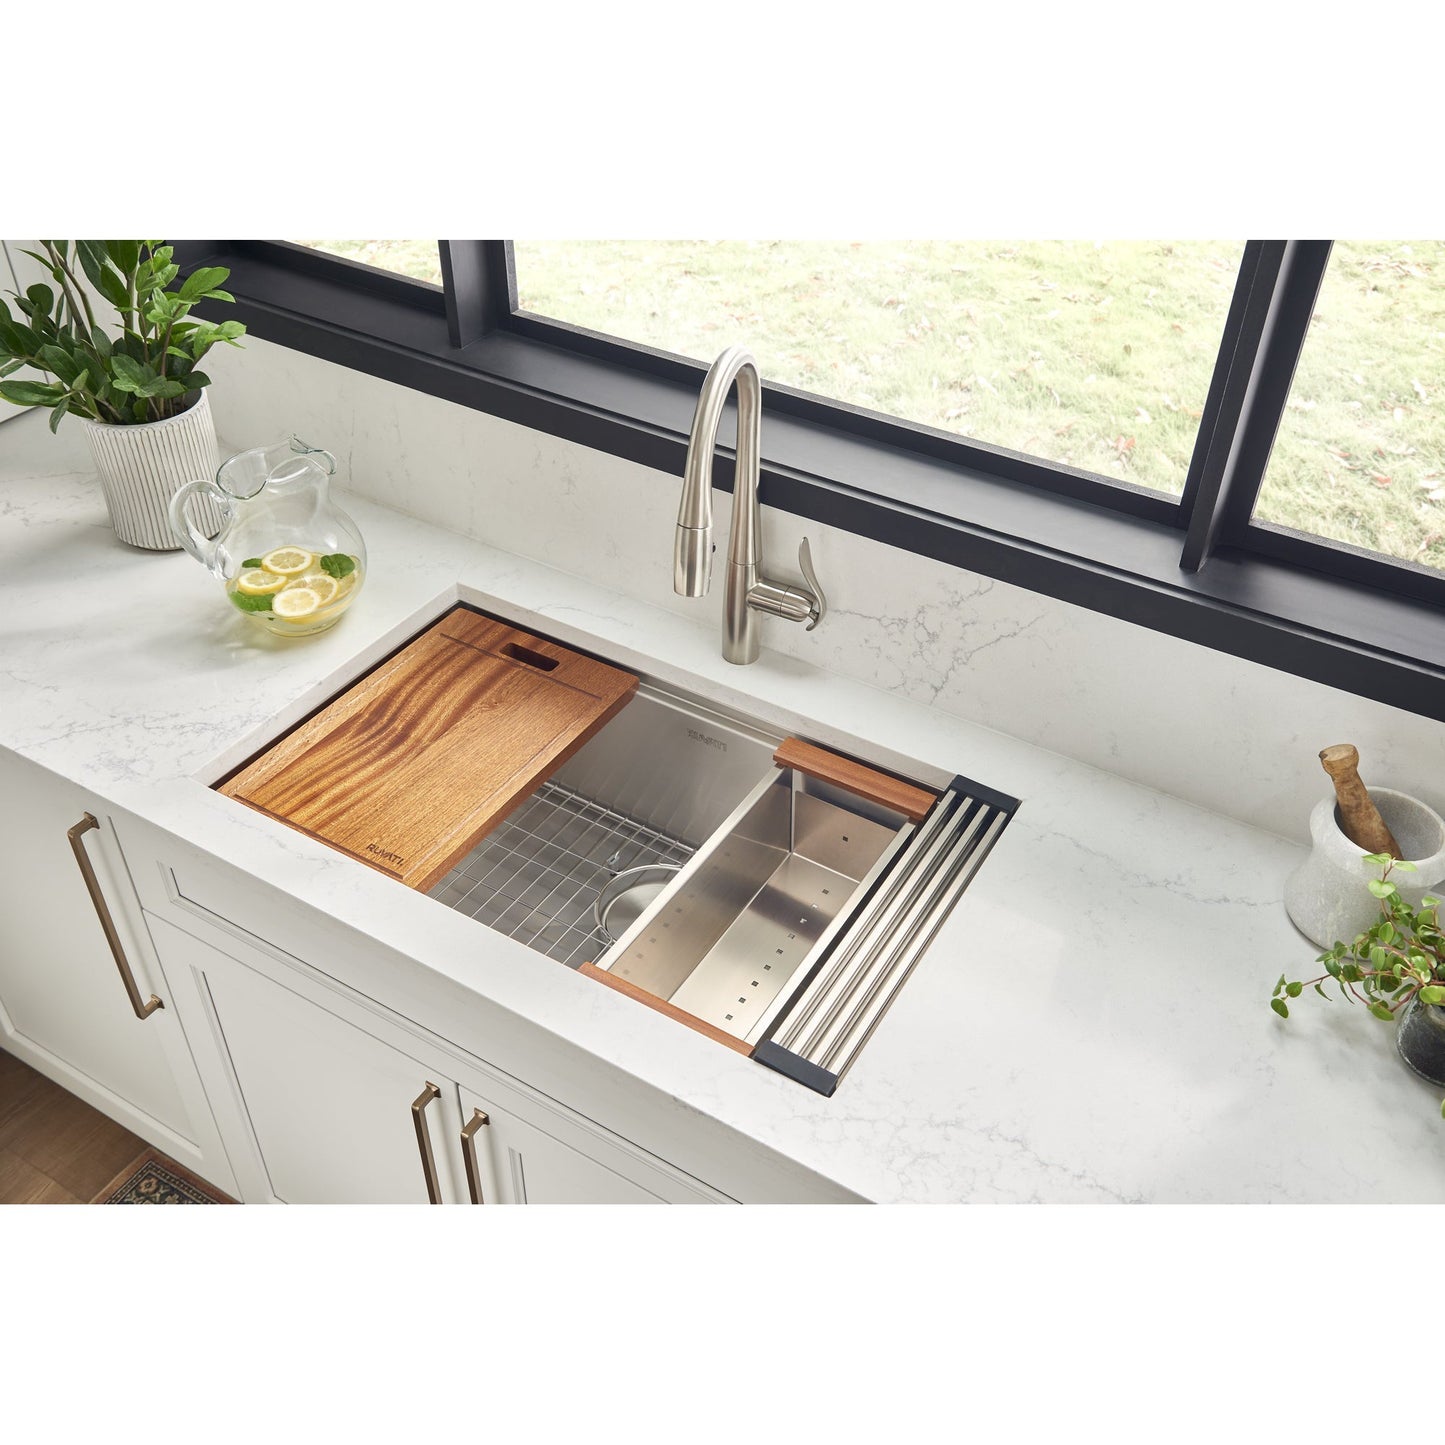 Ruvati Roma 32” x 19" Undermount Stainless Steel Single Bowl Workstation Kitchen Sink With Bottom Rinse Grid and Drain Assembly